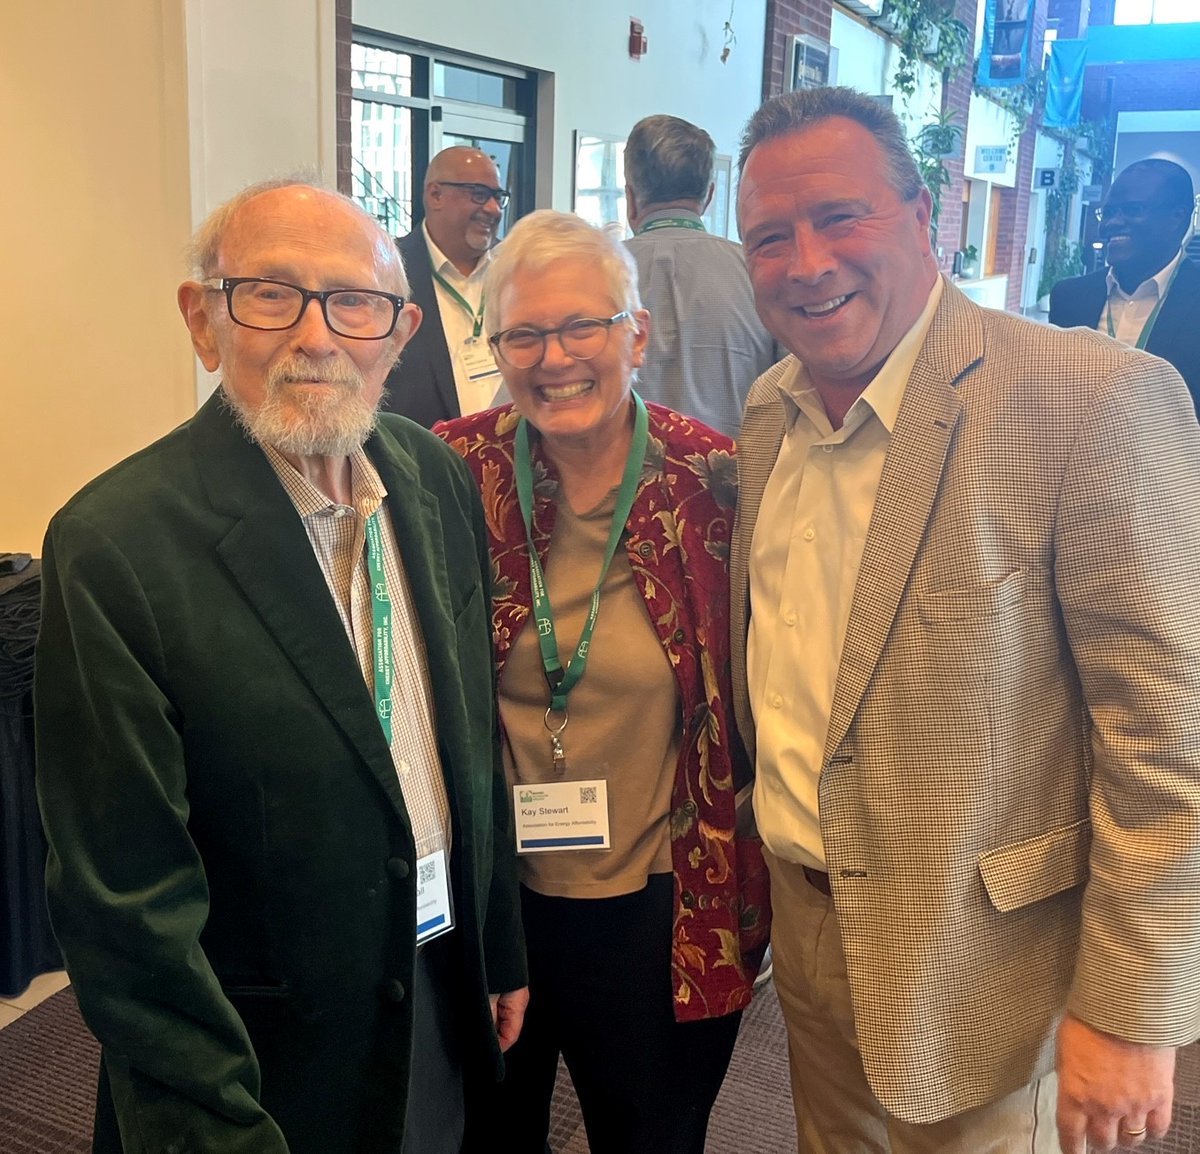 It was an emotional evening as BPI, host sponsor @aea_us , and the multifamily industry paid tribute to industry hero David Hepinstall at the Multifamily Weatherization Conference in Saratoga Springs last night.